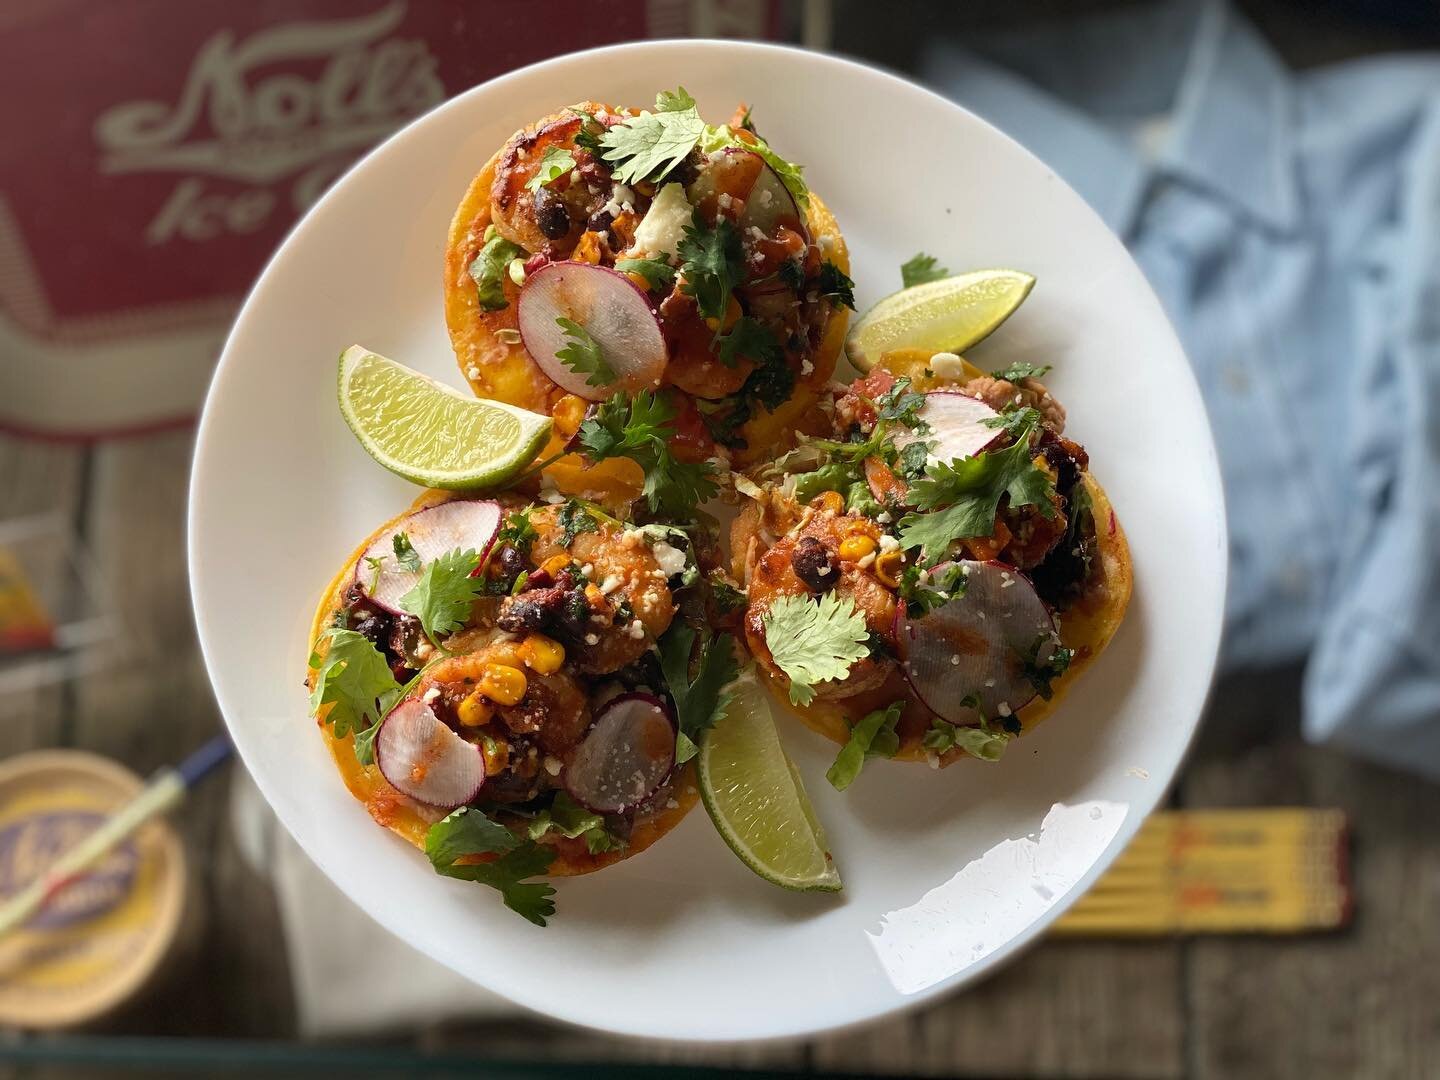 Grilled Shrimp Tostada on special today!  3 crispy tortillas topped with  refried beans, lettuce, corn, black beans, queso fresco, radish, cilantro, grilled shrimp, and a tomatillo chili sauce!